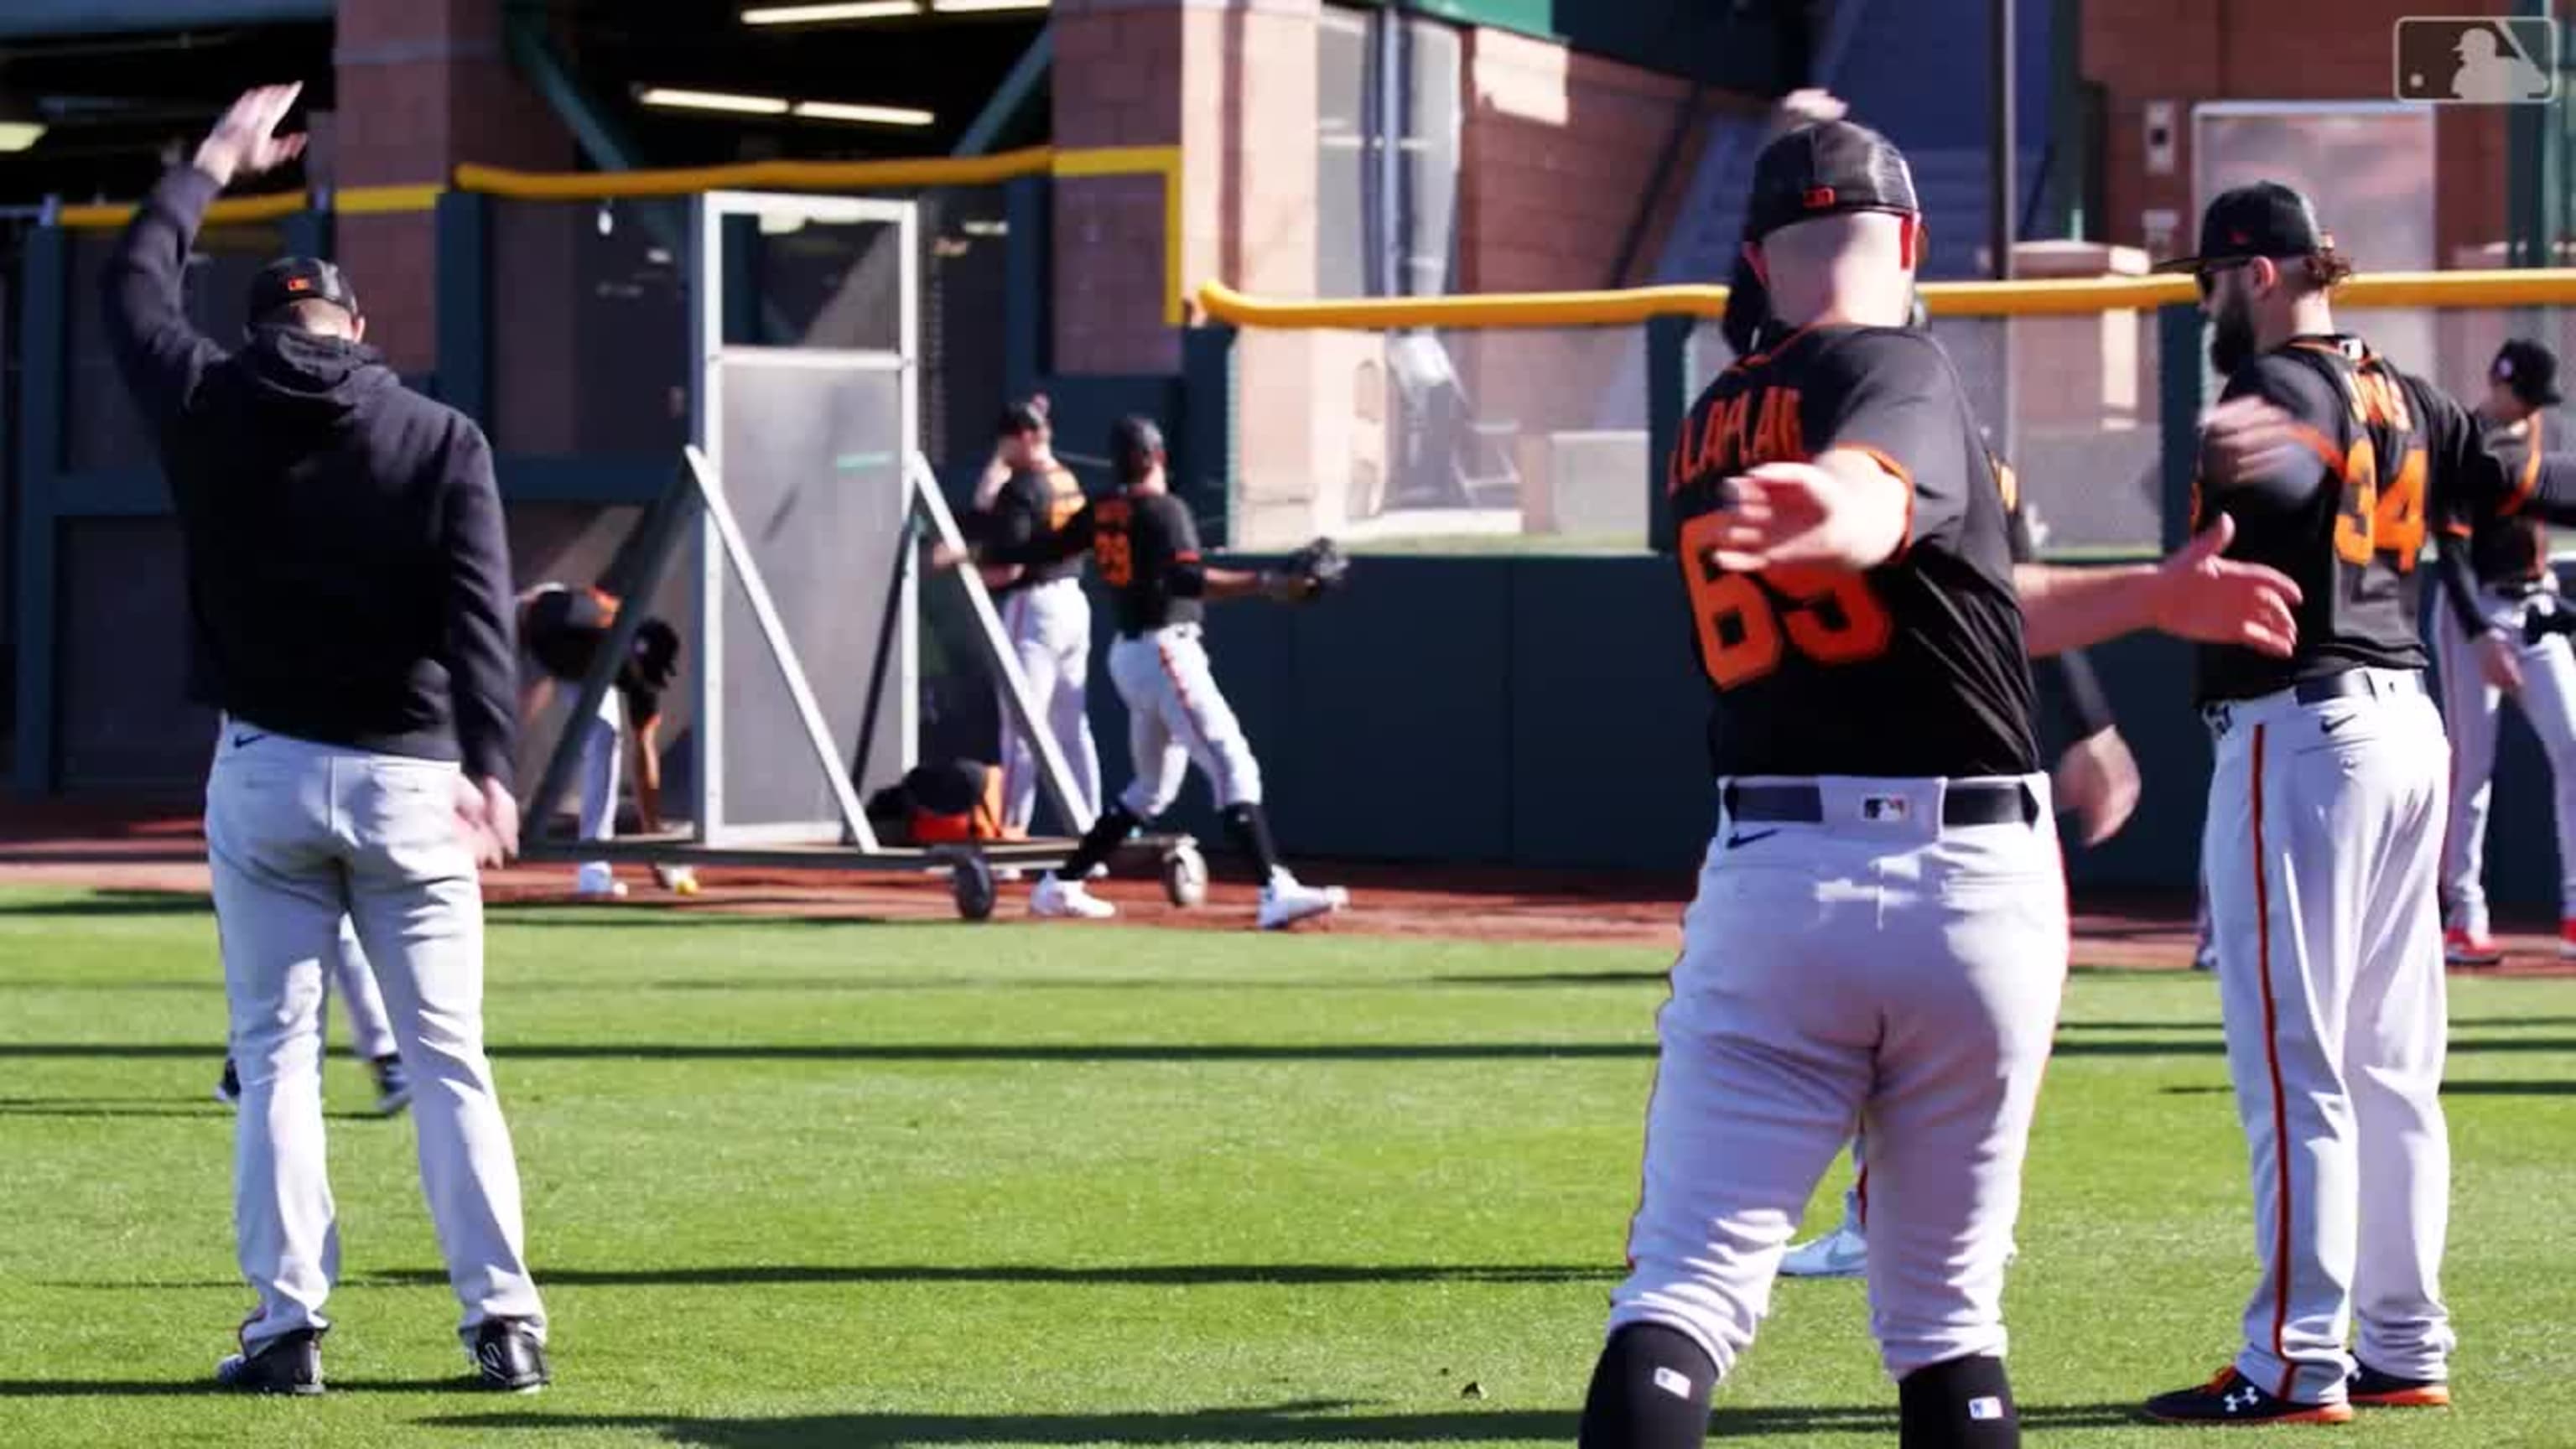 Spring Training 2020: San Francisco Giants players pose for 'back